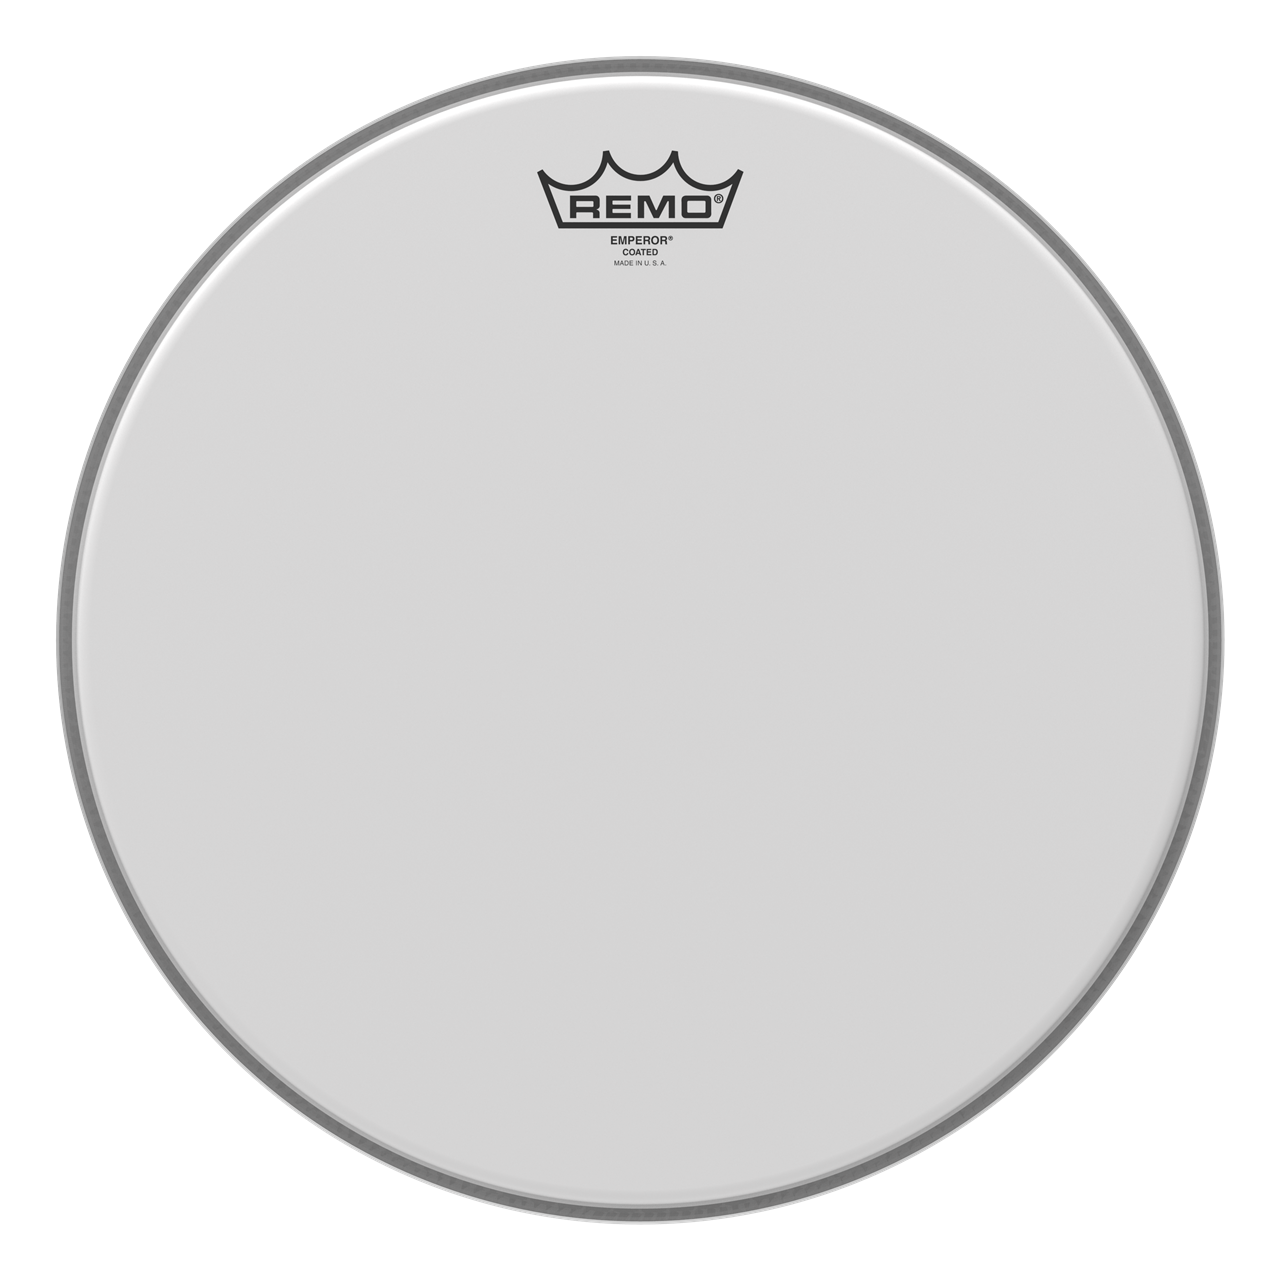 Remo BE-0112-00 Emperor, 12" Coated